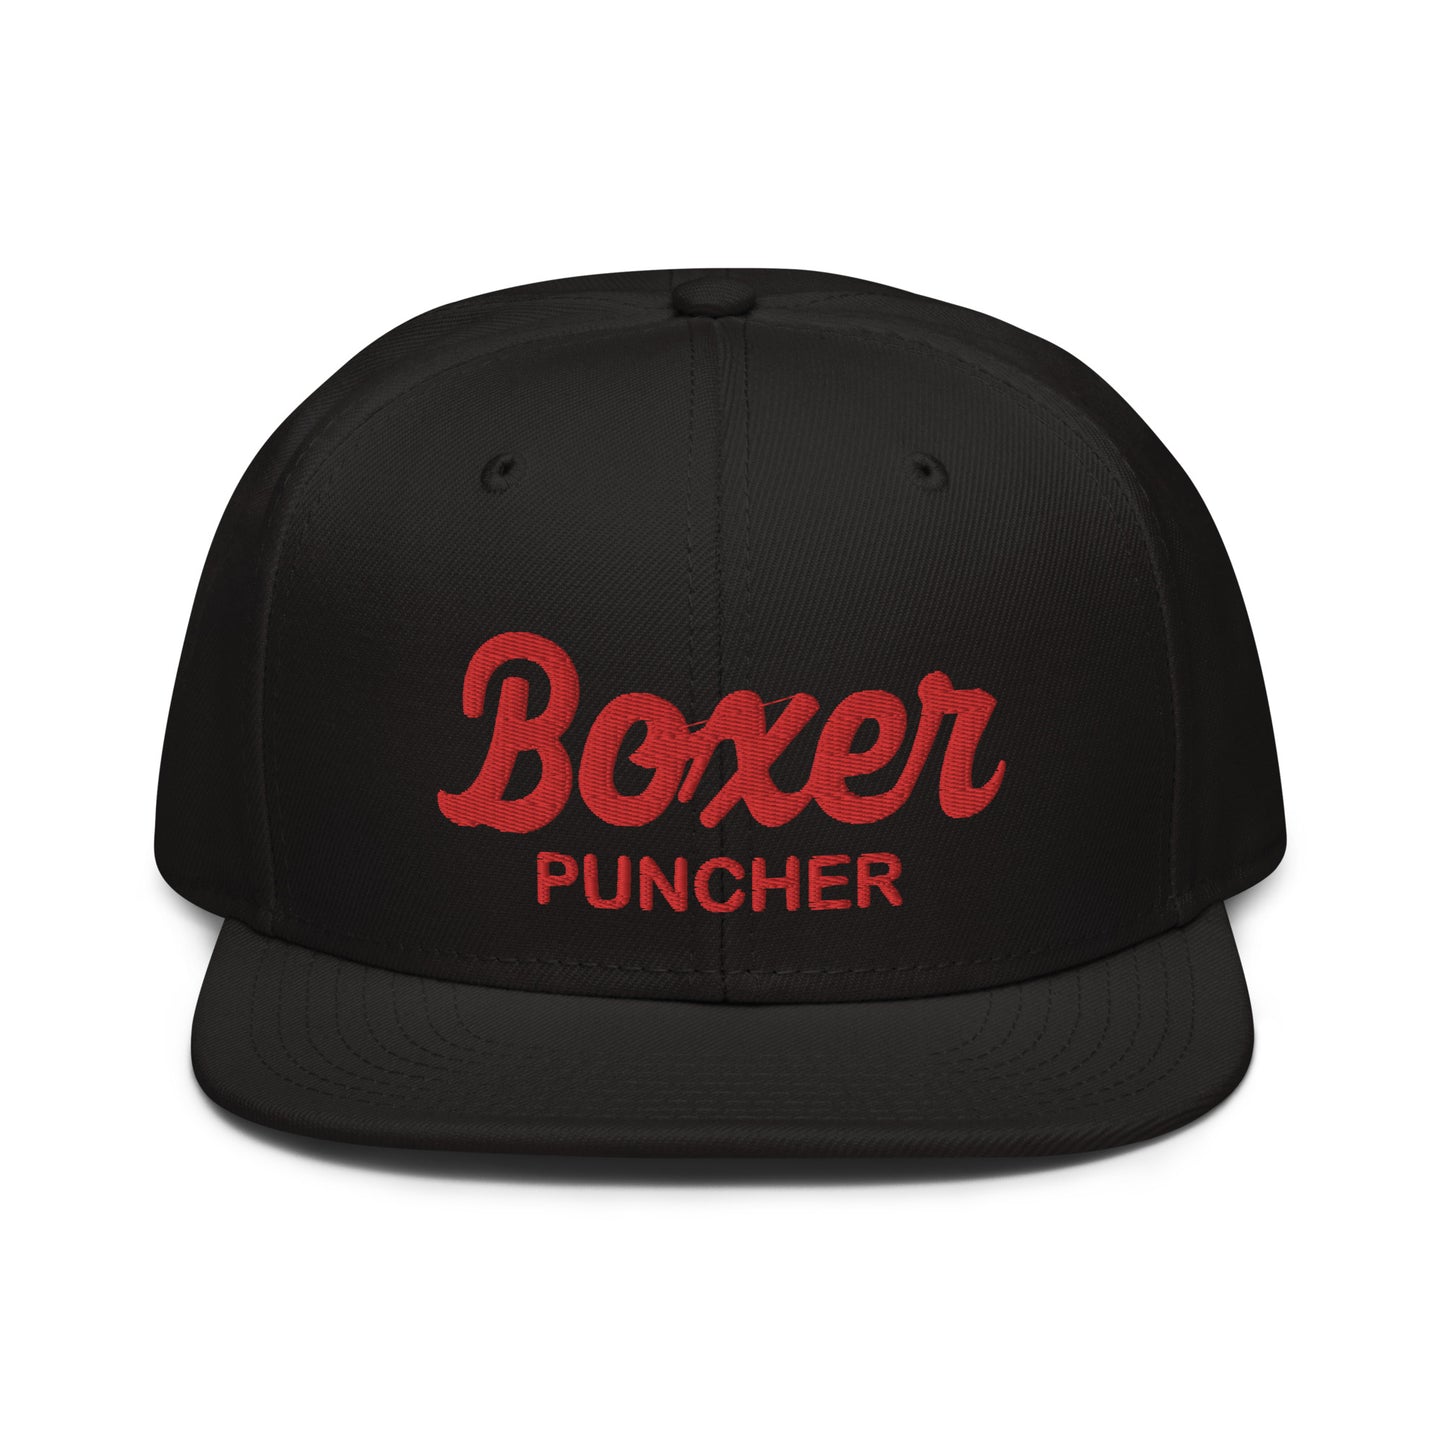 SWEET SCIENCE SPORTS BOXER PUNCHER Snapback